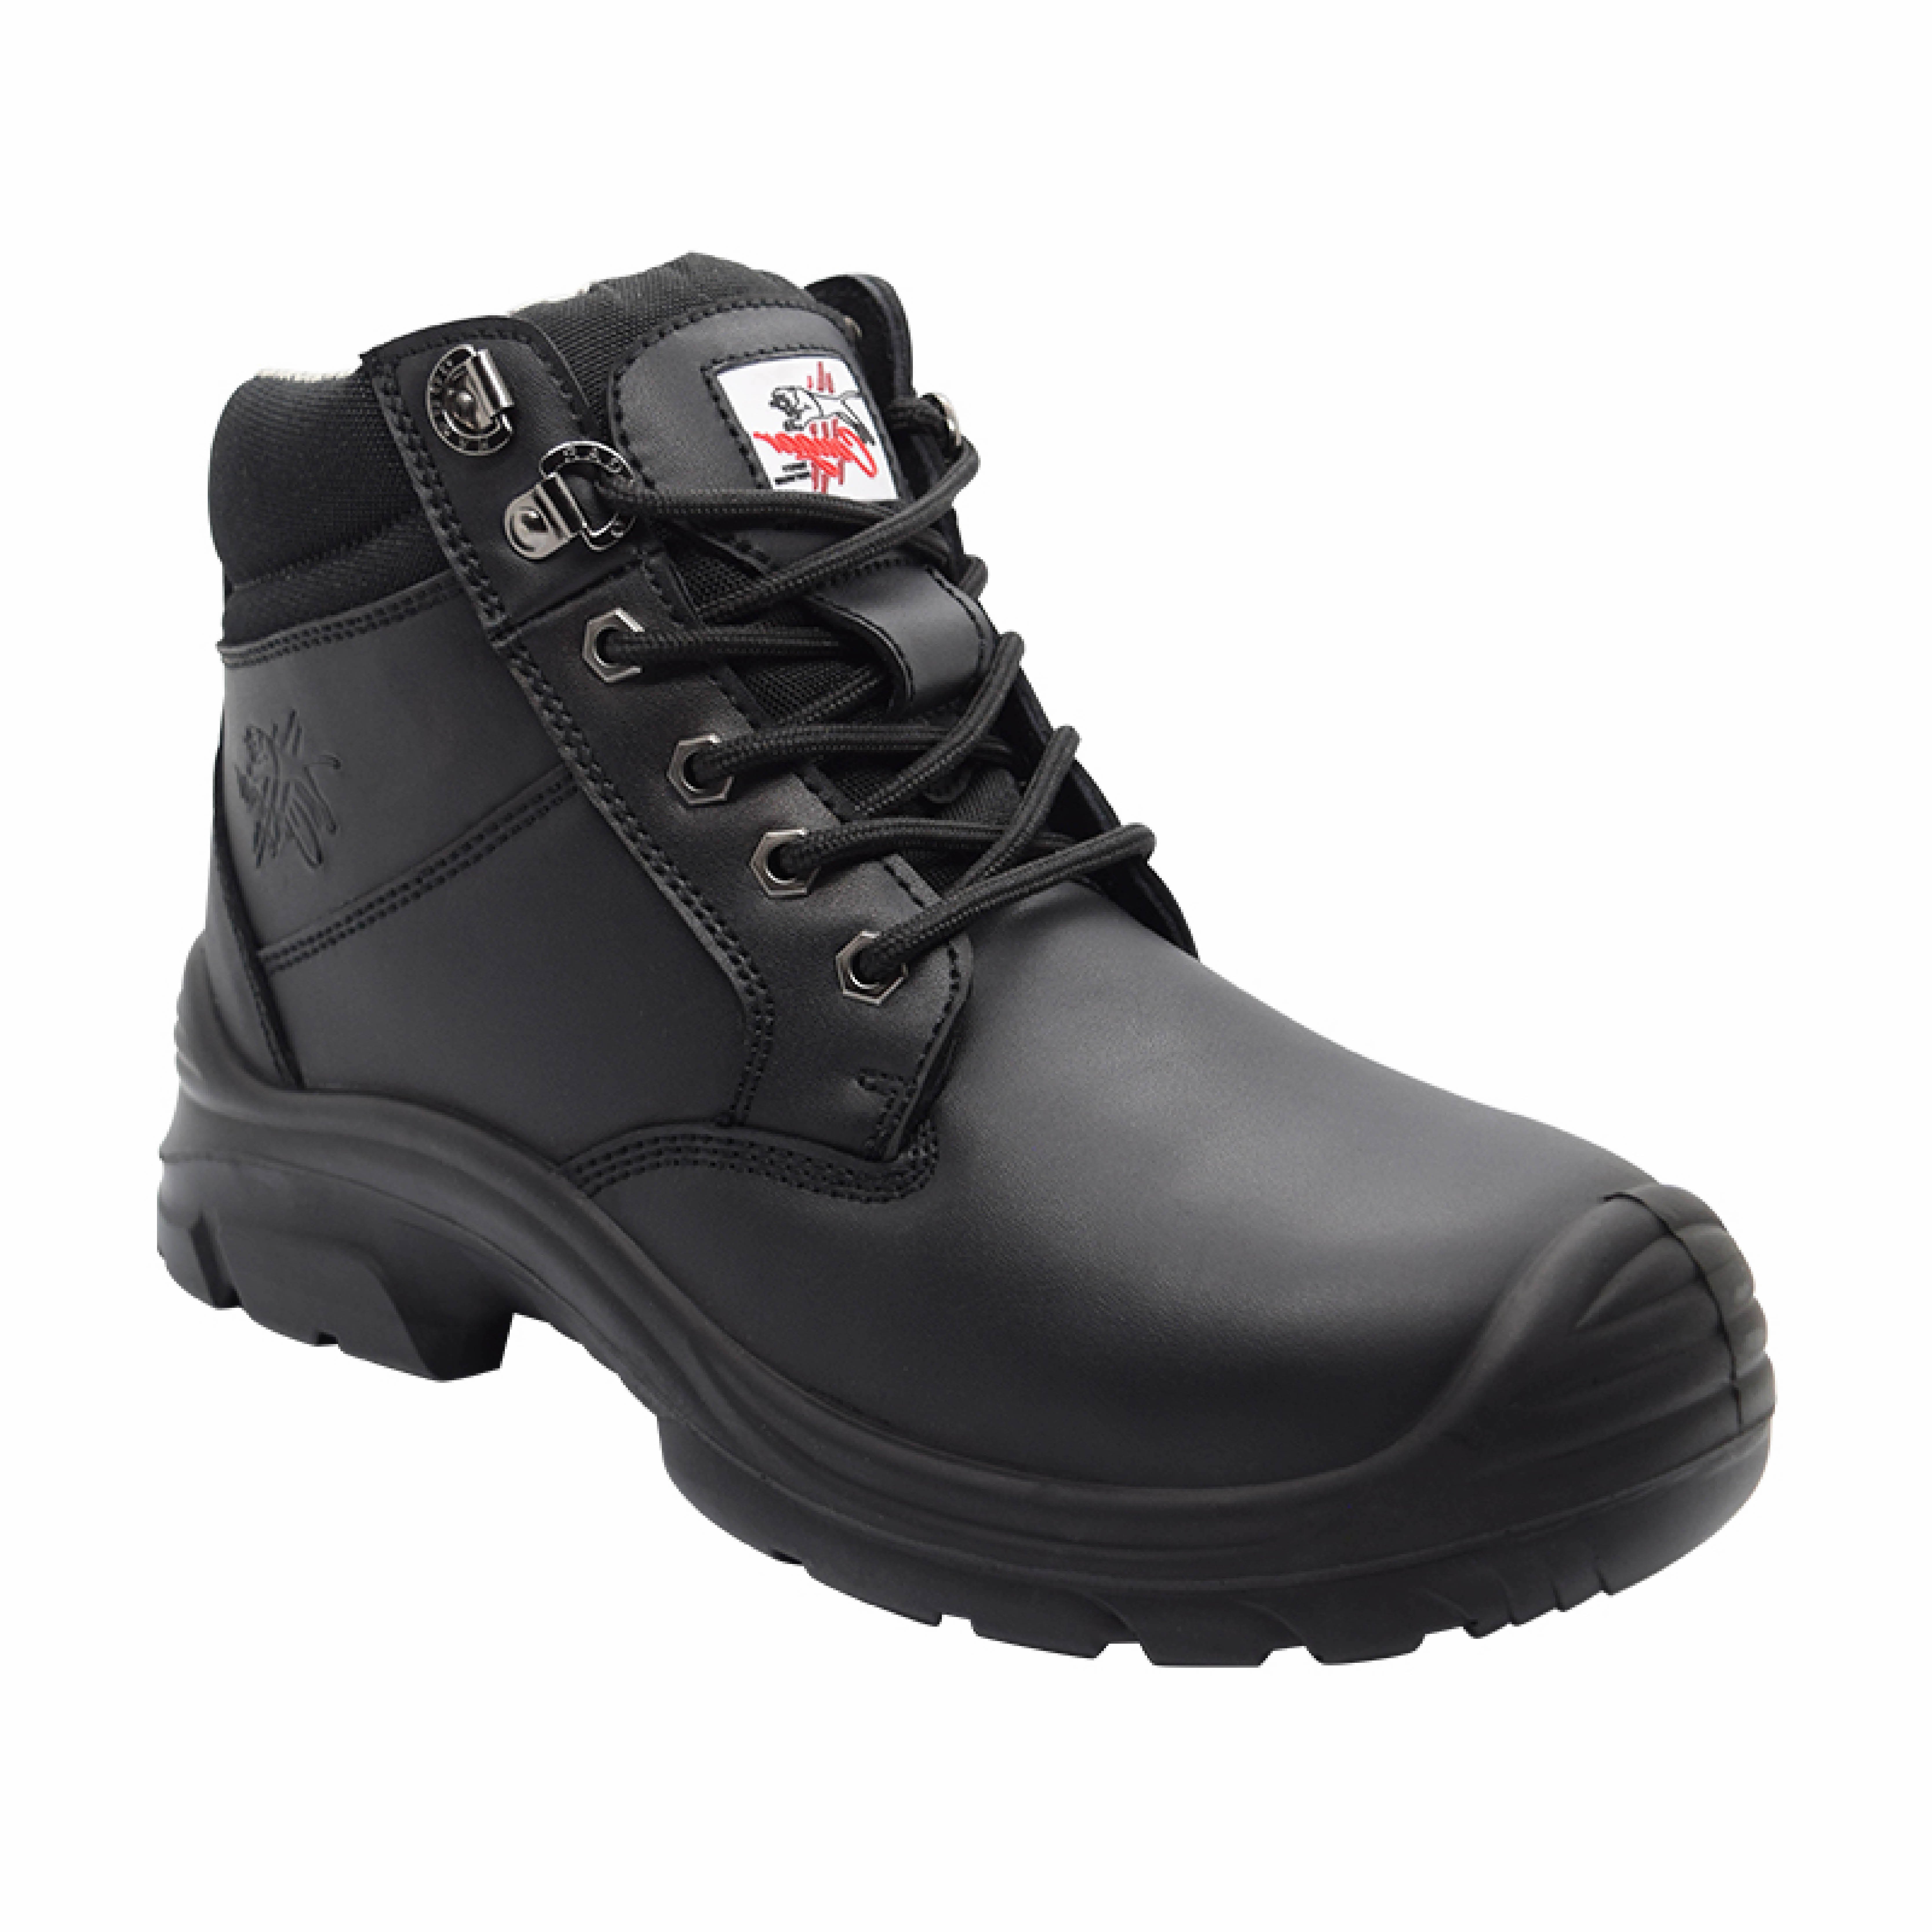 Lace Up Safety Boots with Safety Toe Black Size 9 (1 pair)